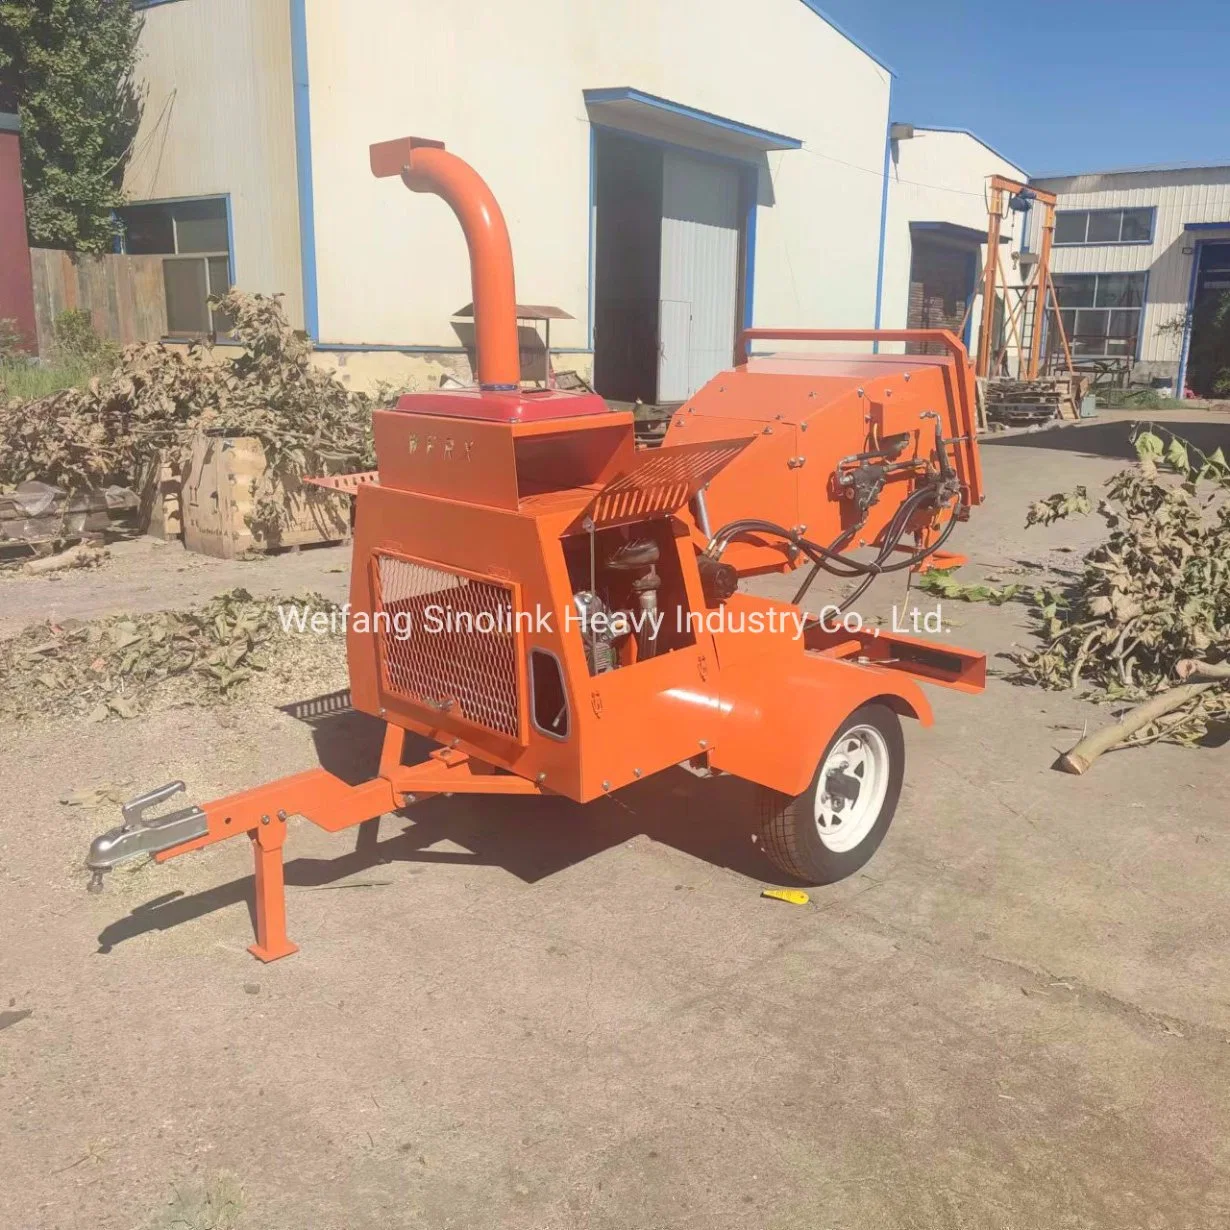 22HP Gasoline Engine Powered Garden Towable Wood Chipper Mulcer